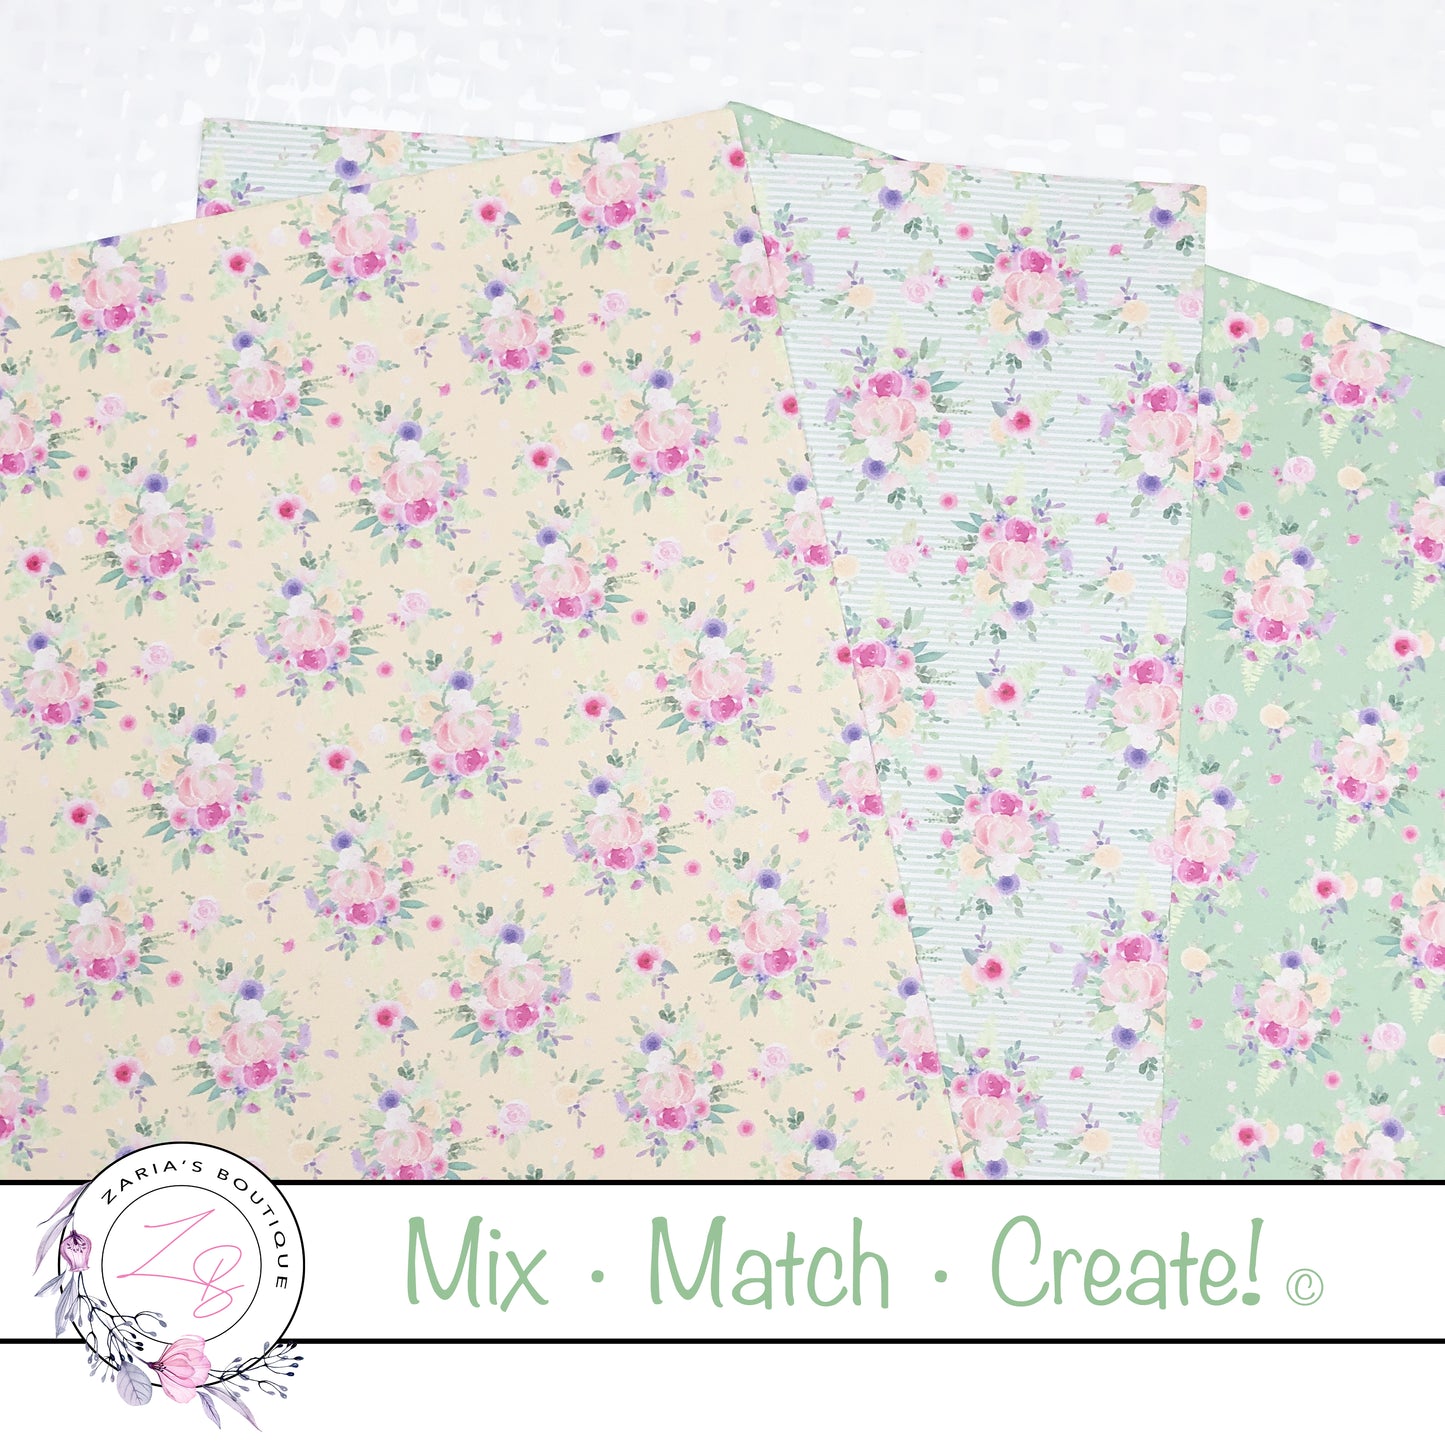 Mix ⋅ Match ⋅ Create © Minty Floral ⋅ Vegan Faux Leather & Glitter ⋅ Single Sheets & Multi-Packs